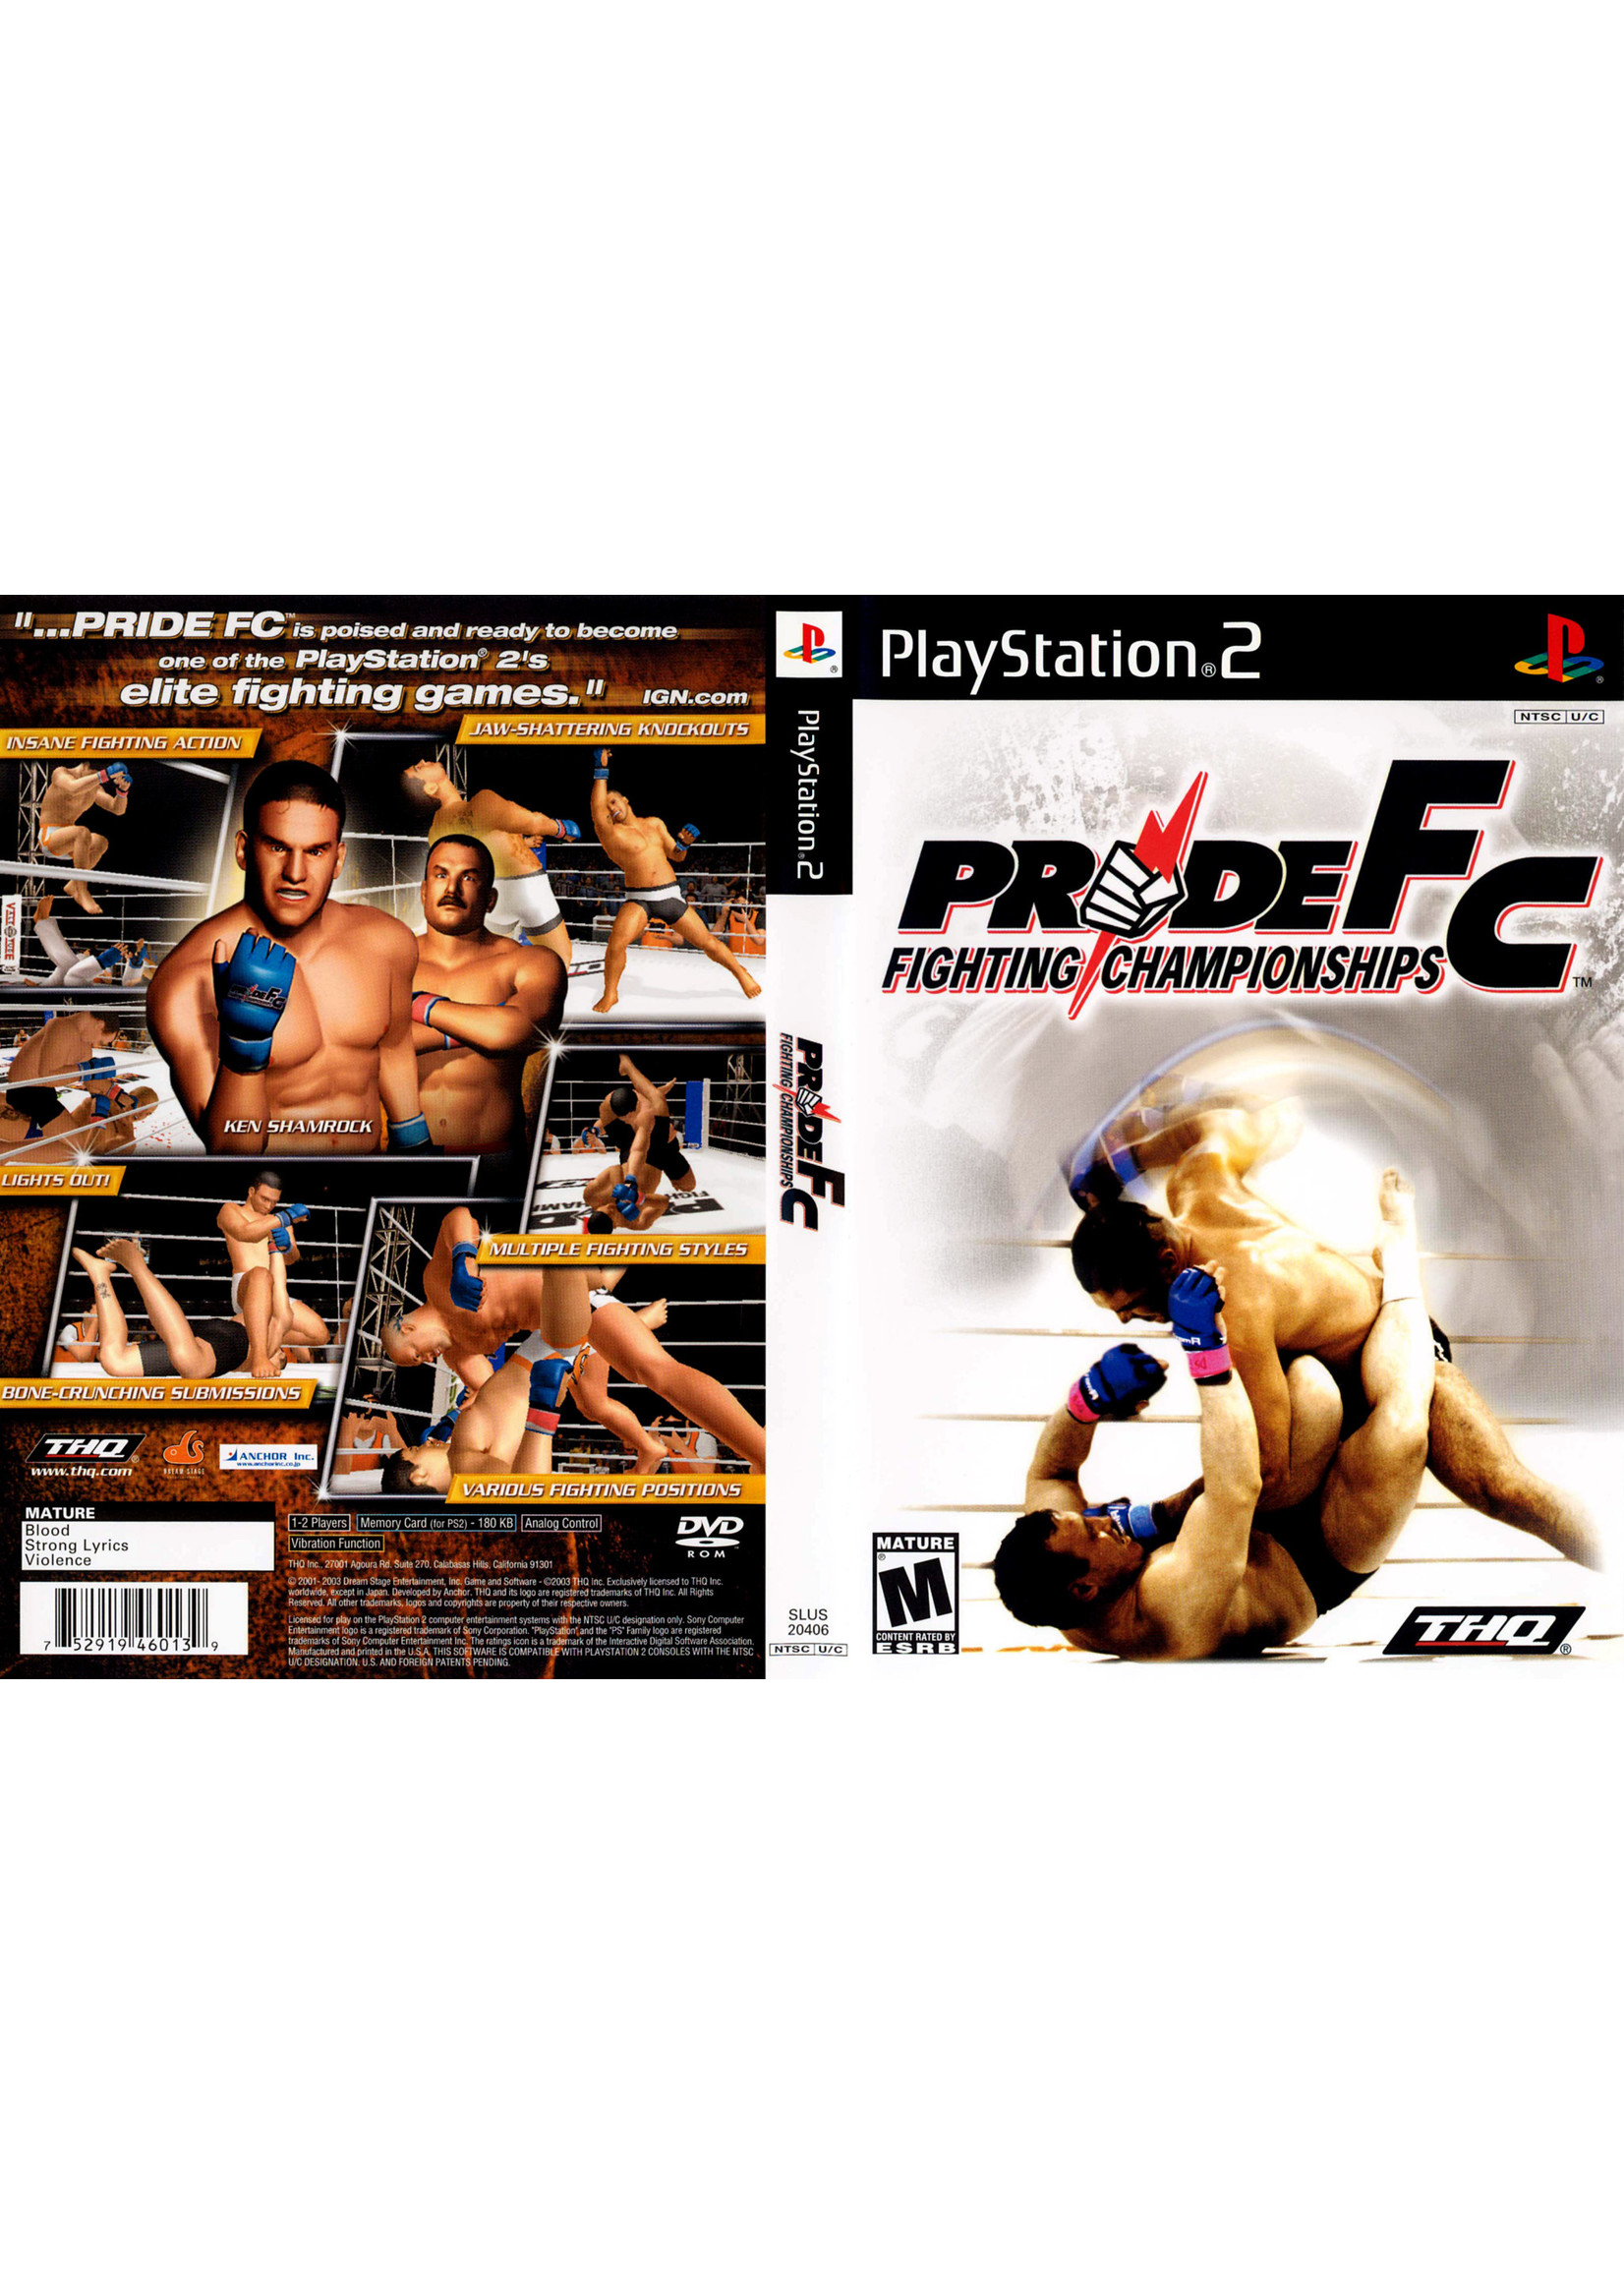 Sony Playstation 2 (PS2) Pride FC